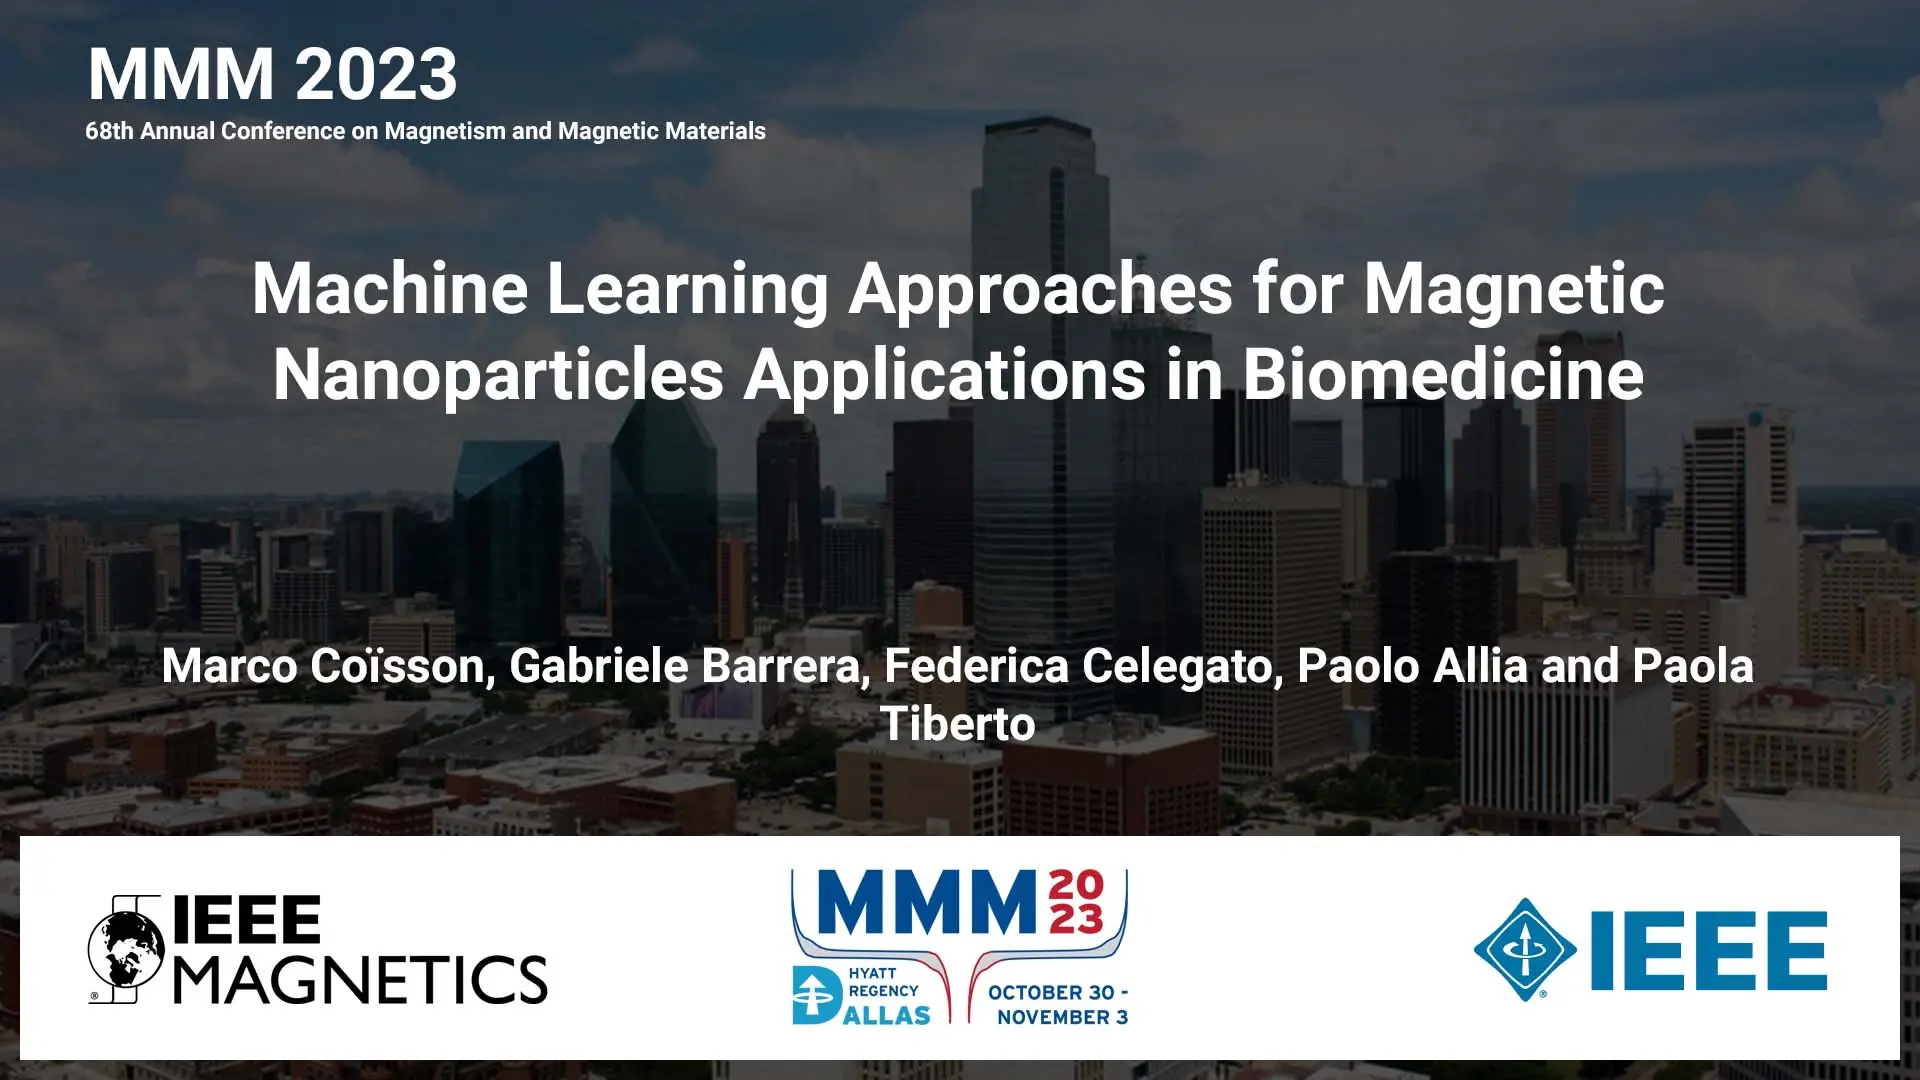 AD-10: Machine Learning Approaches for Magnetic Nanoparticles Applications in Biomedicine